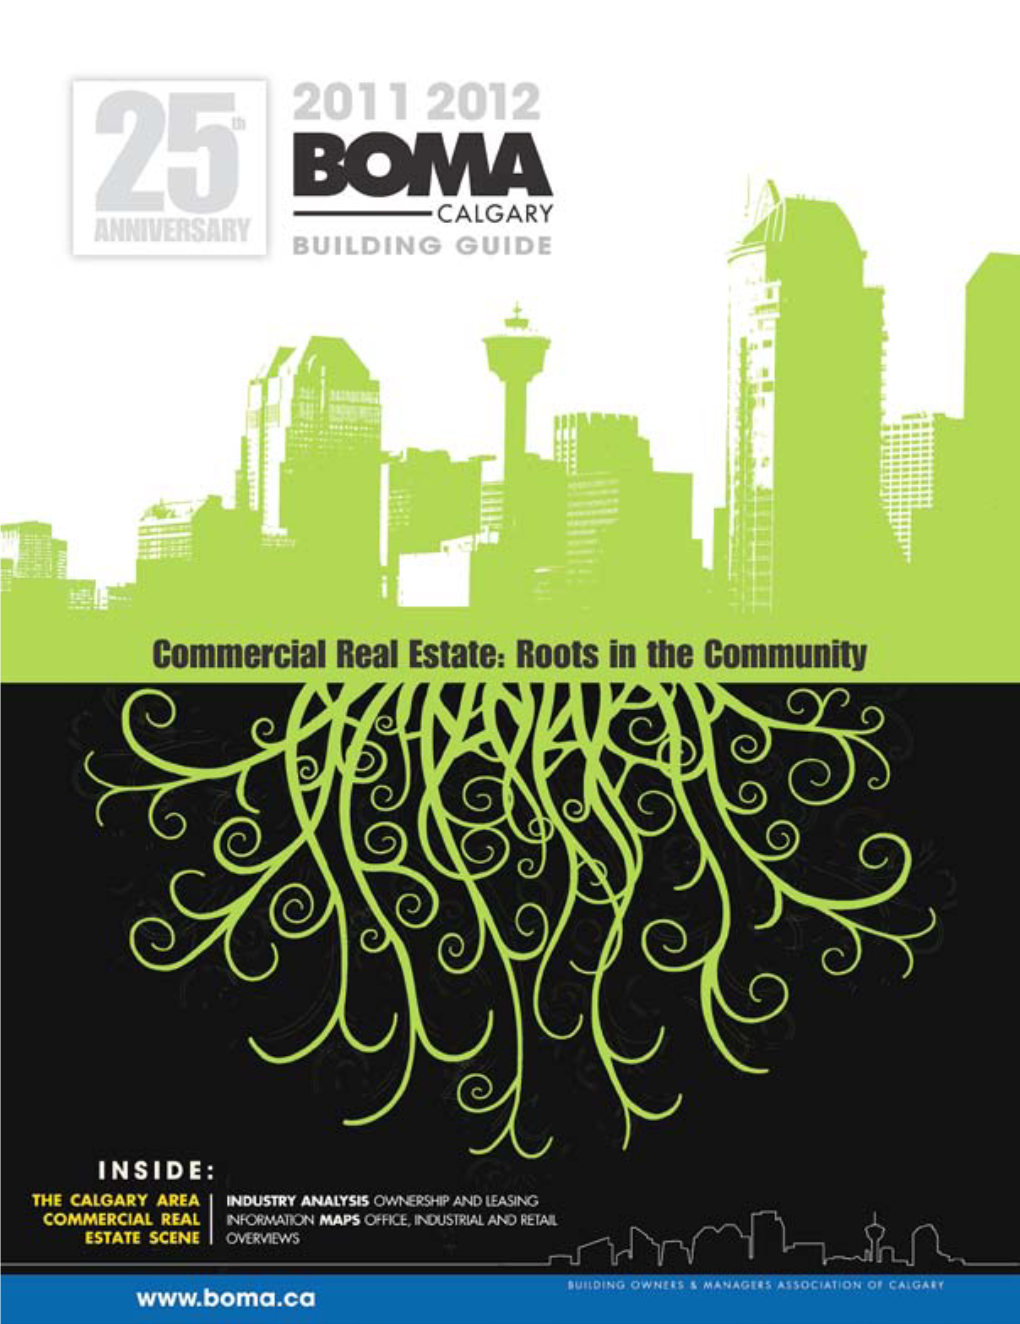 Boma Building Guide – Calgary 1 2011-2012 Choosing a Security Provider Is One of the Most Important Decisions You Have to Make